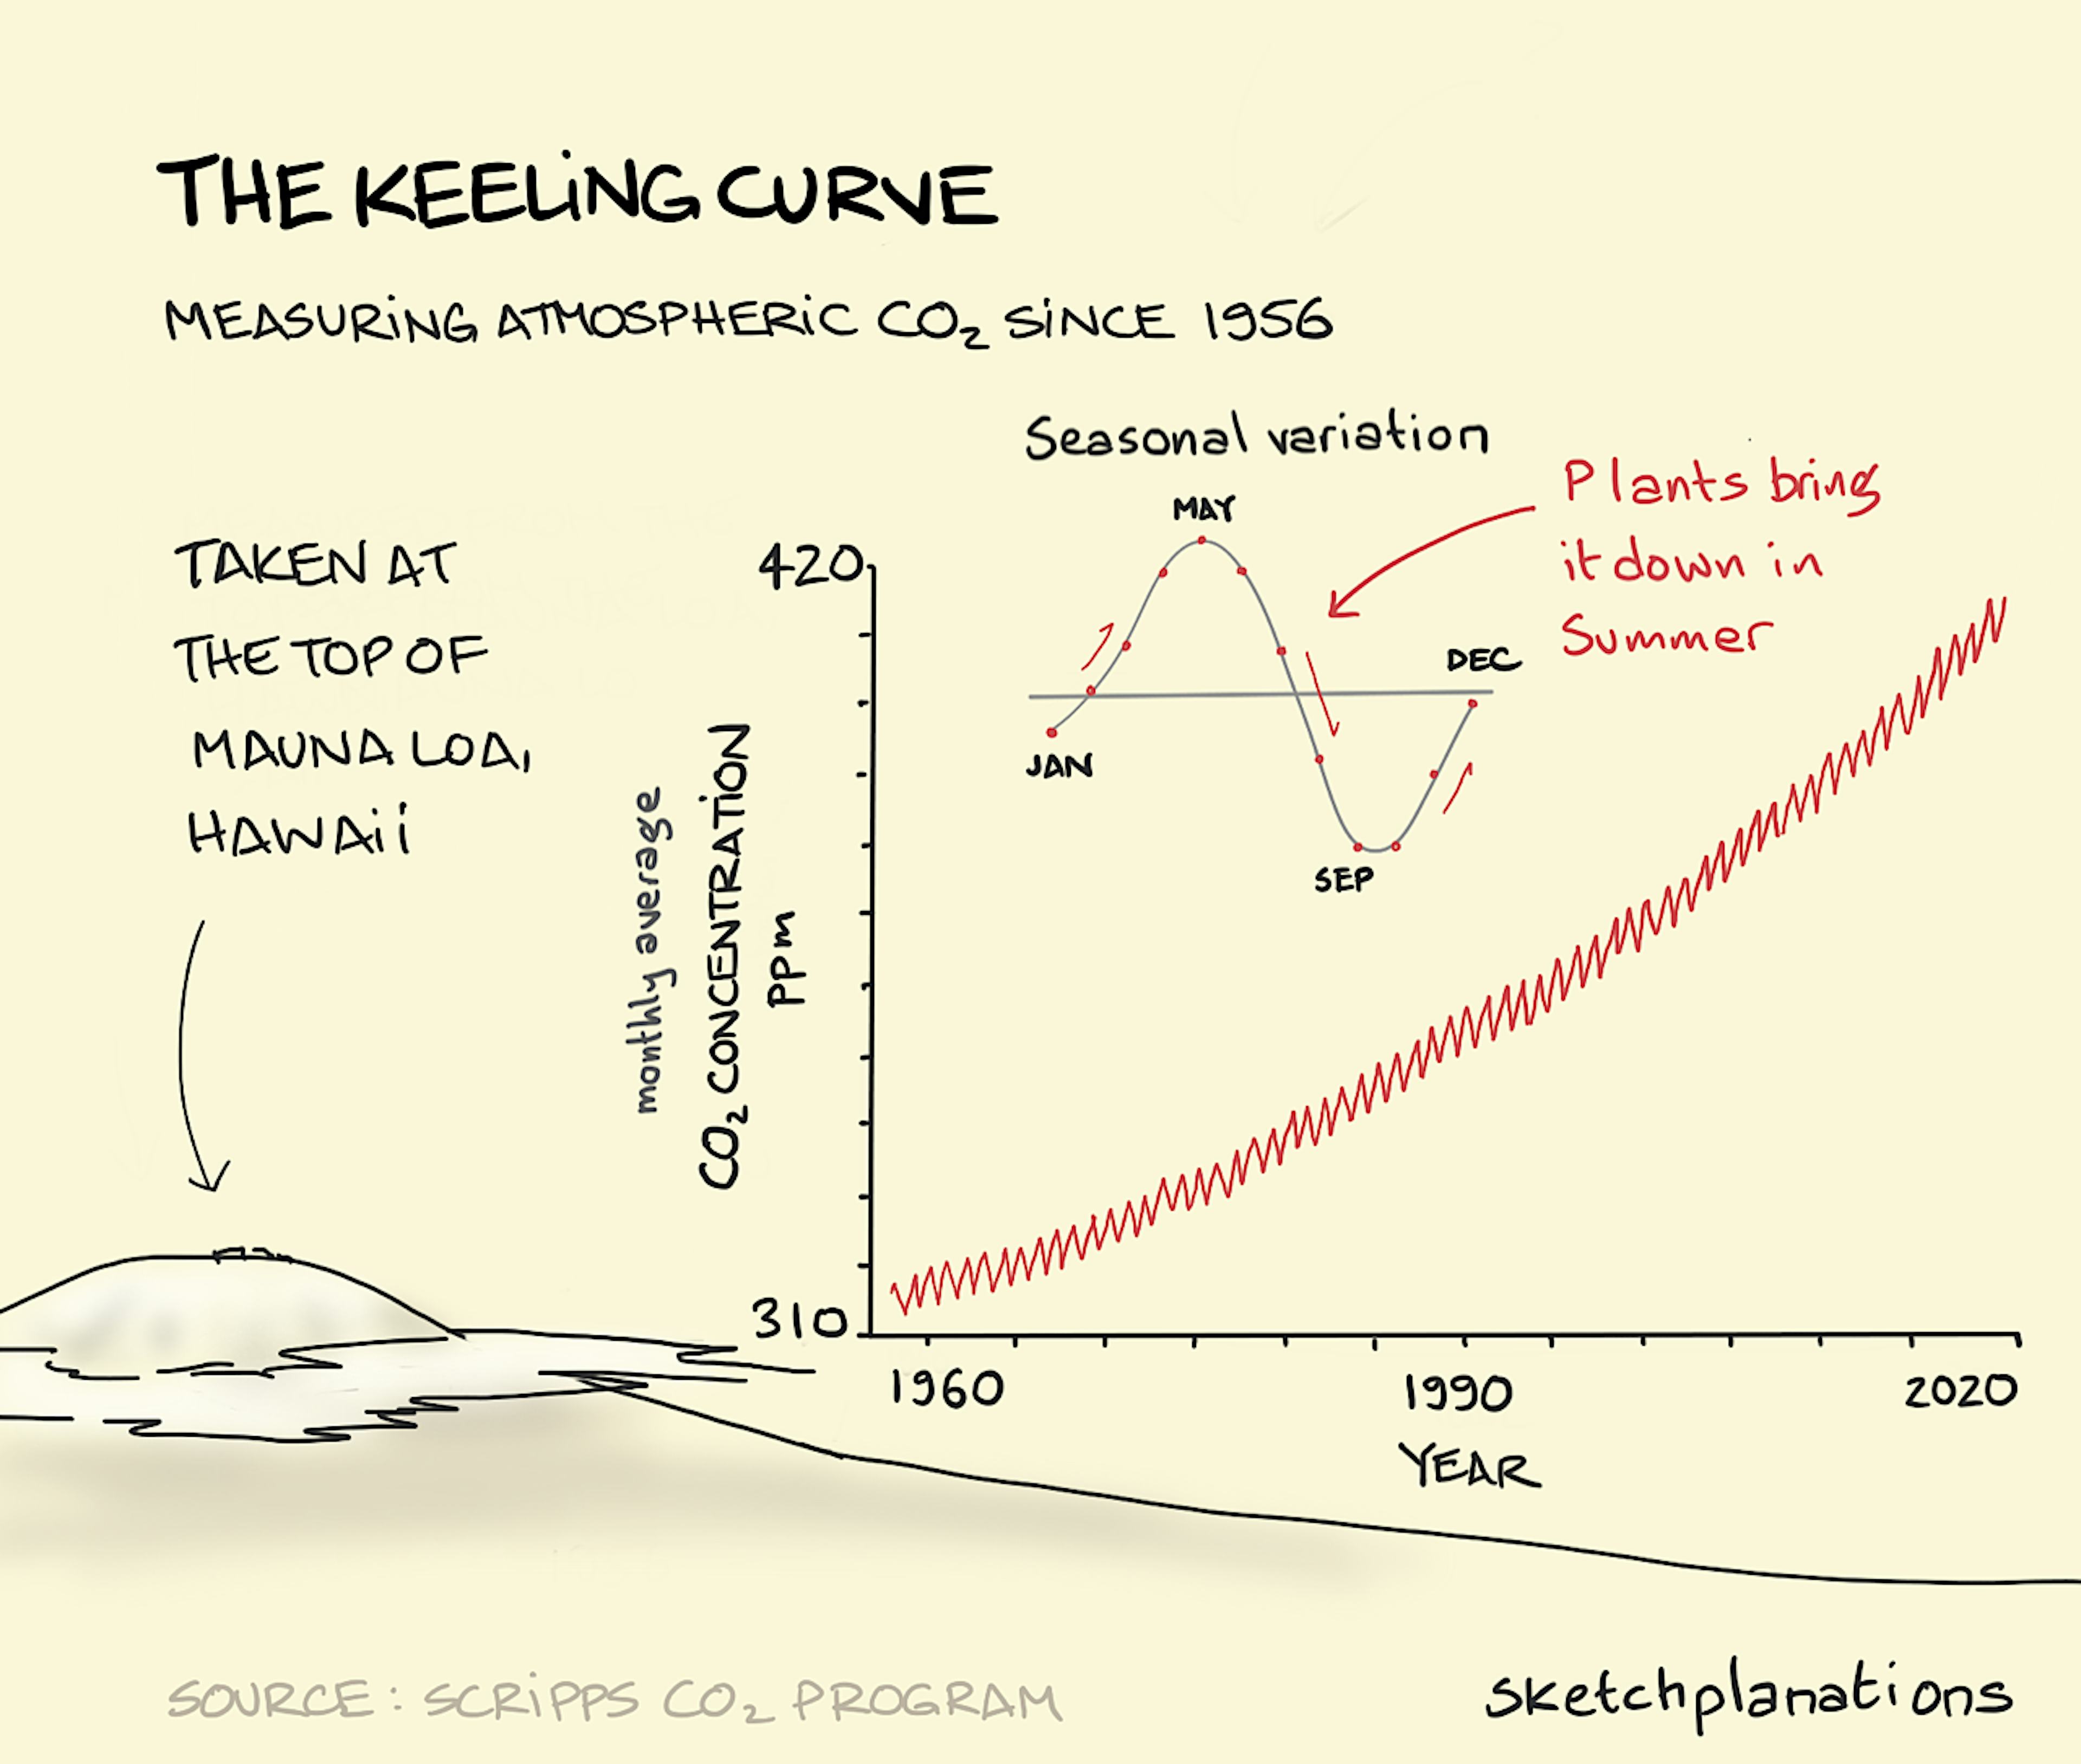 The Keeling Curve illustration: A line graph shows a tight zig-zag red line rising from around 310 parts per million (ppm) monthly average CO2 concentration in the air at the top of Mauna Loa volcano in Hawaii in 1960, up to 410 ppm in 2020. The smaller graph at the top shows the reason for the zig-zag nature of the line; the seasonal variation of CO2 concentration in the air due to more plants blooming and photosynthesising in Spring and Summer. 